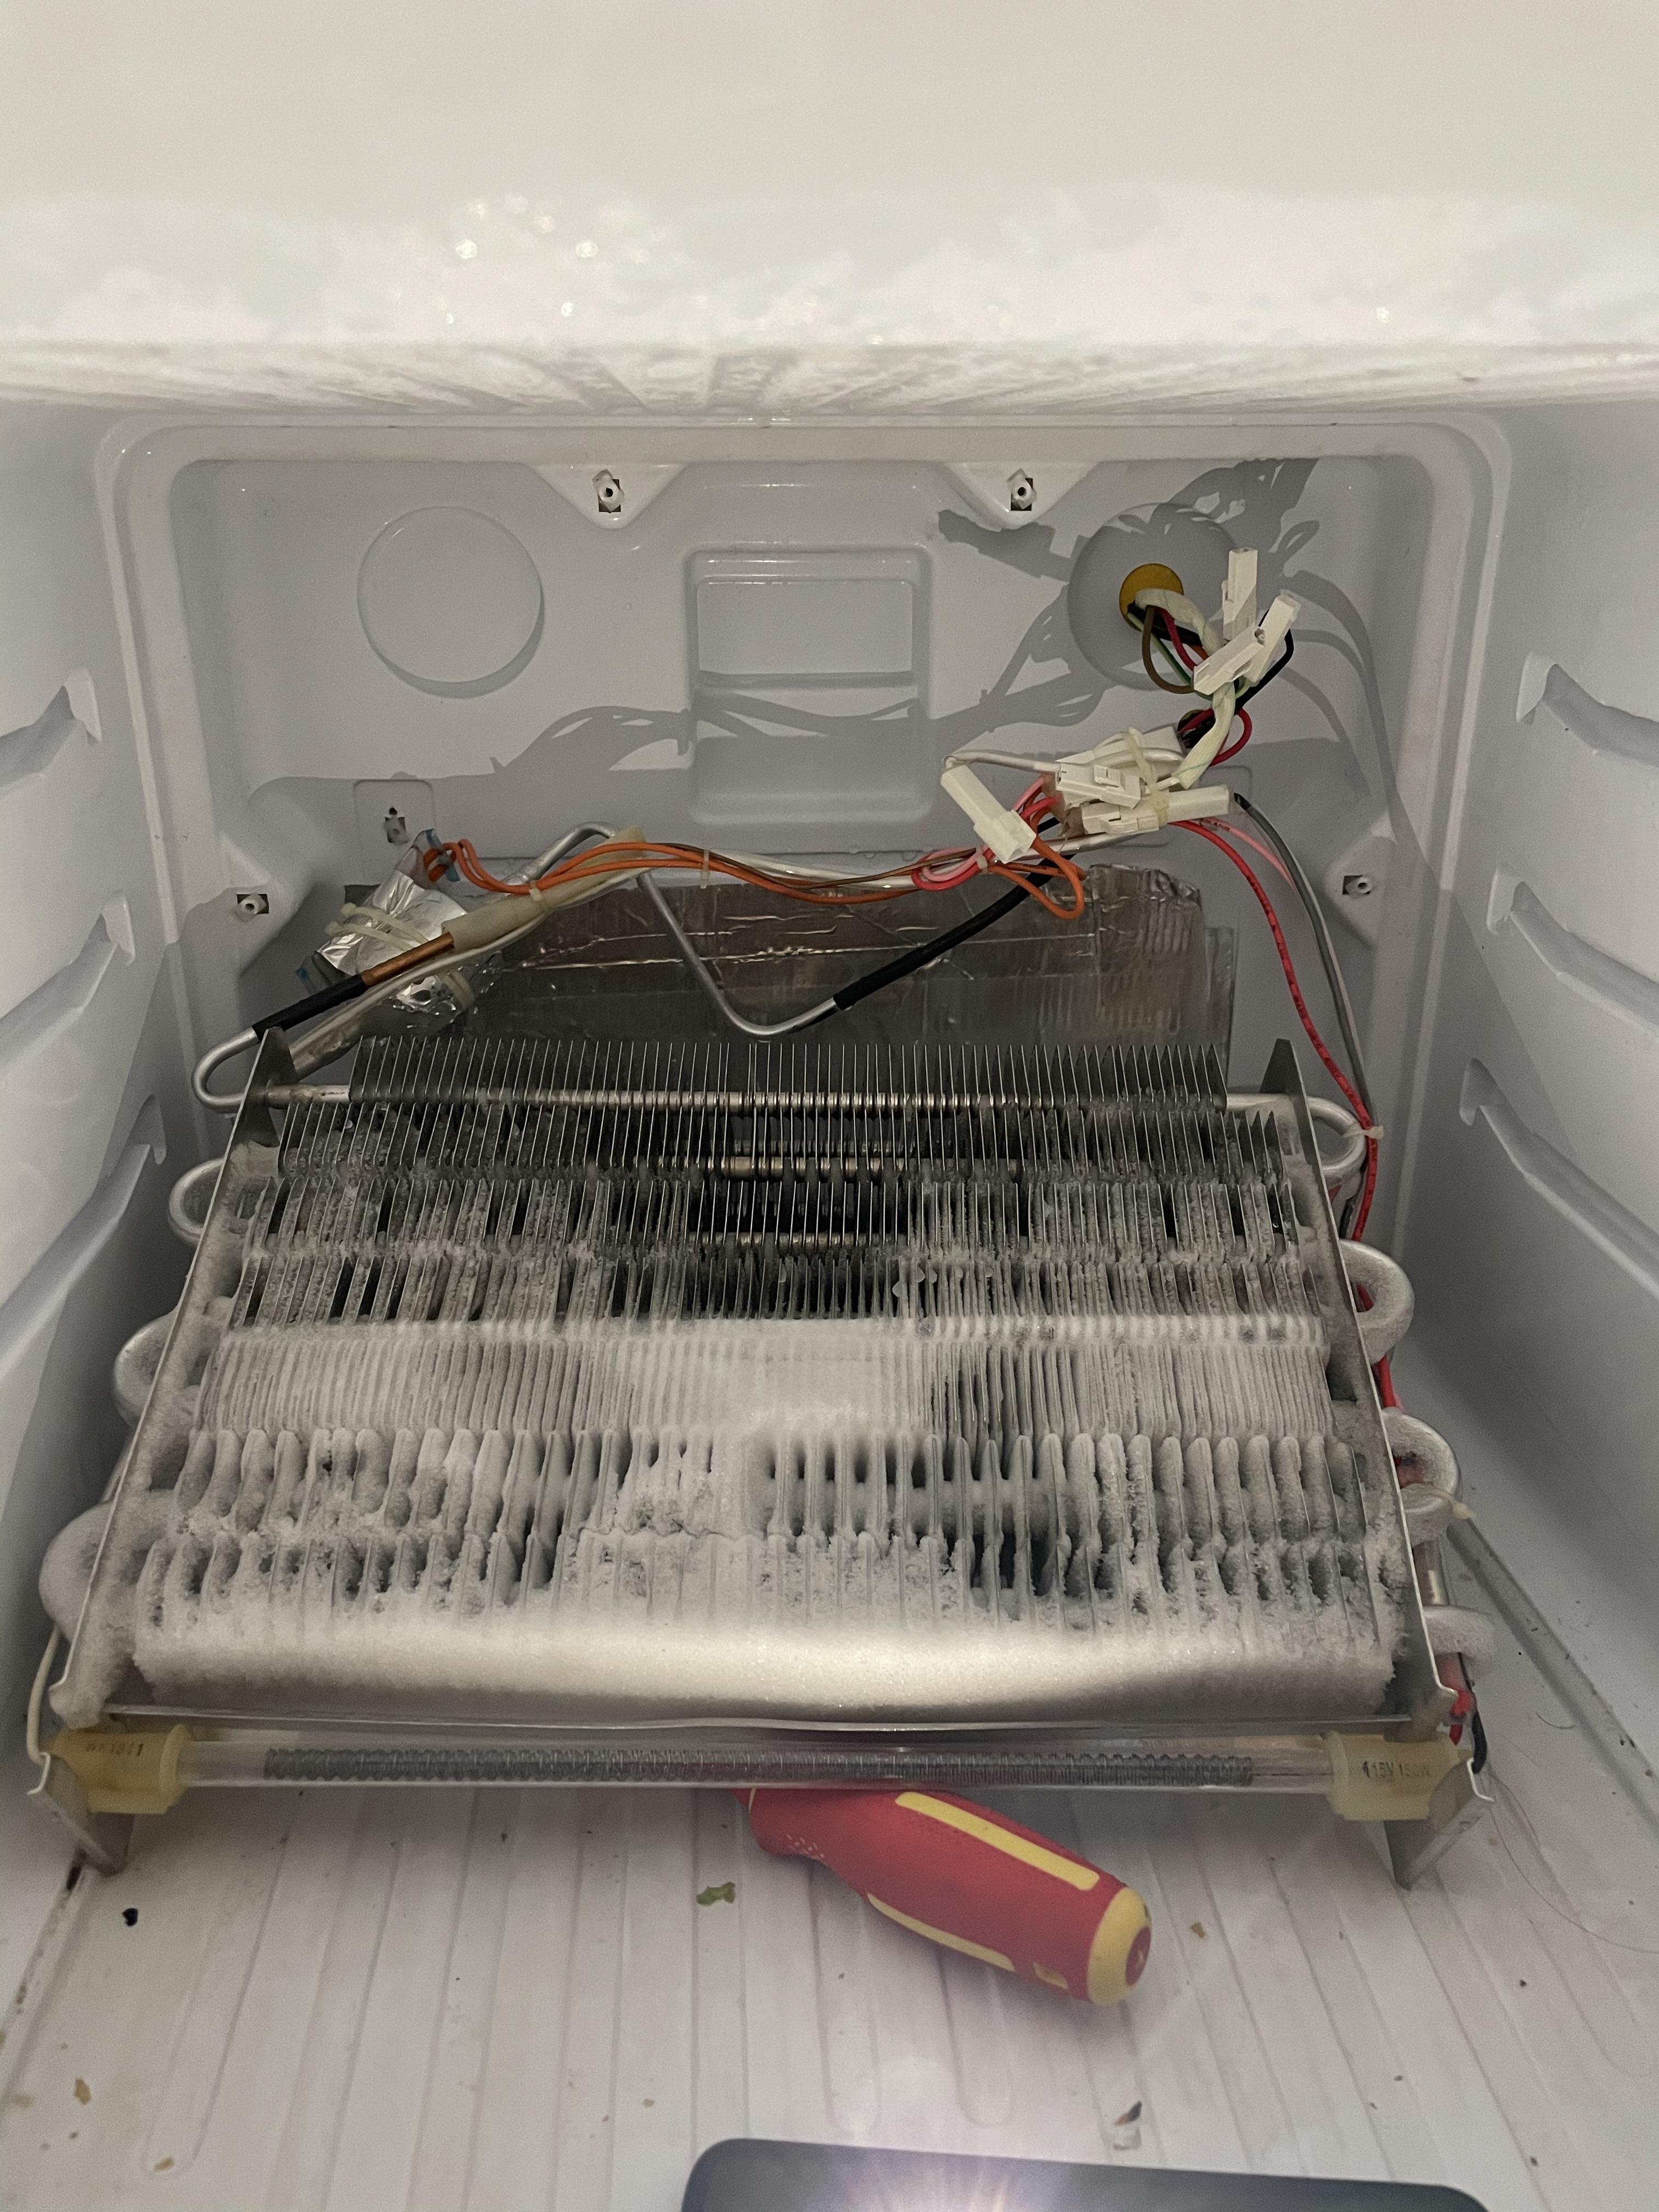 Pop Quiz: What's Wrong with this Freezer? - Appliance Repair Tech Tips ...